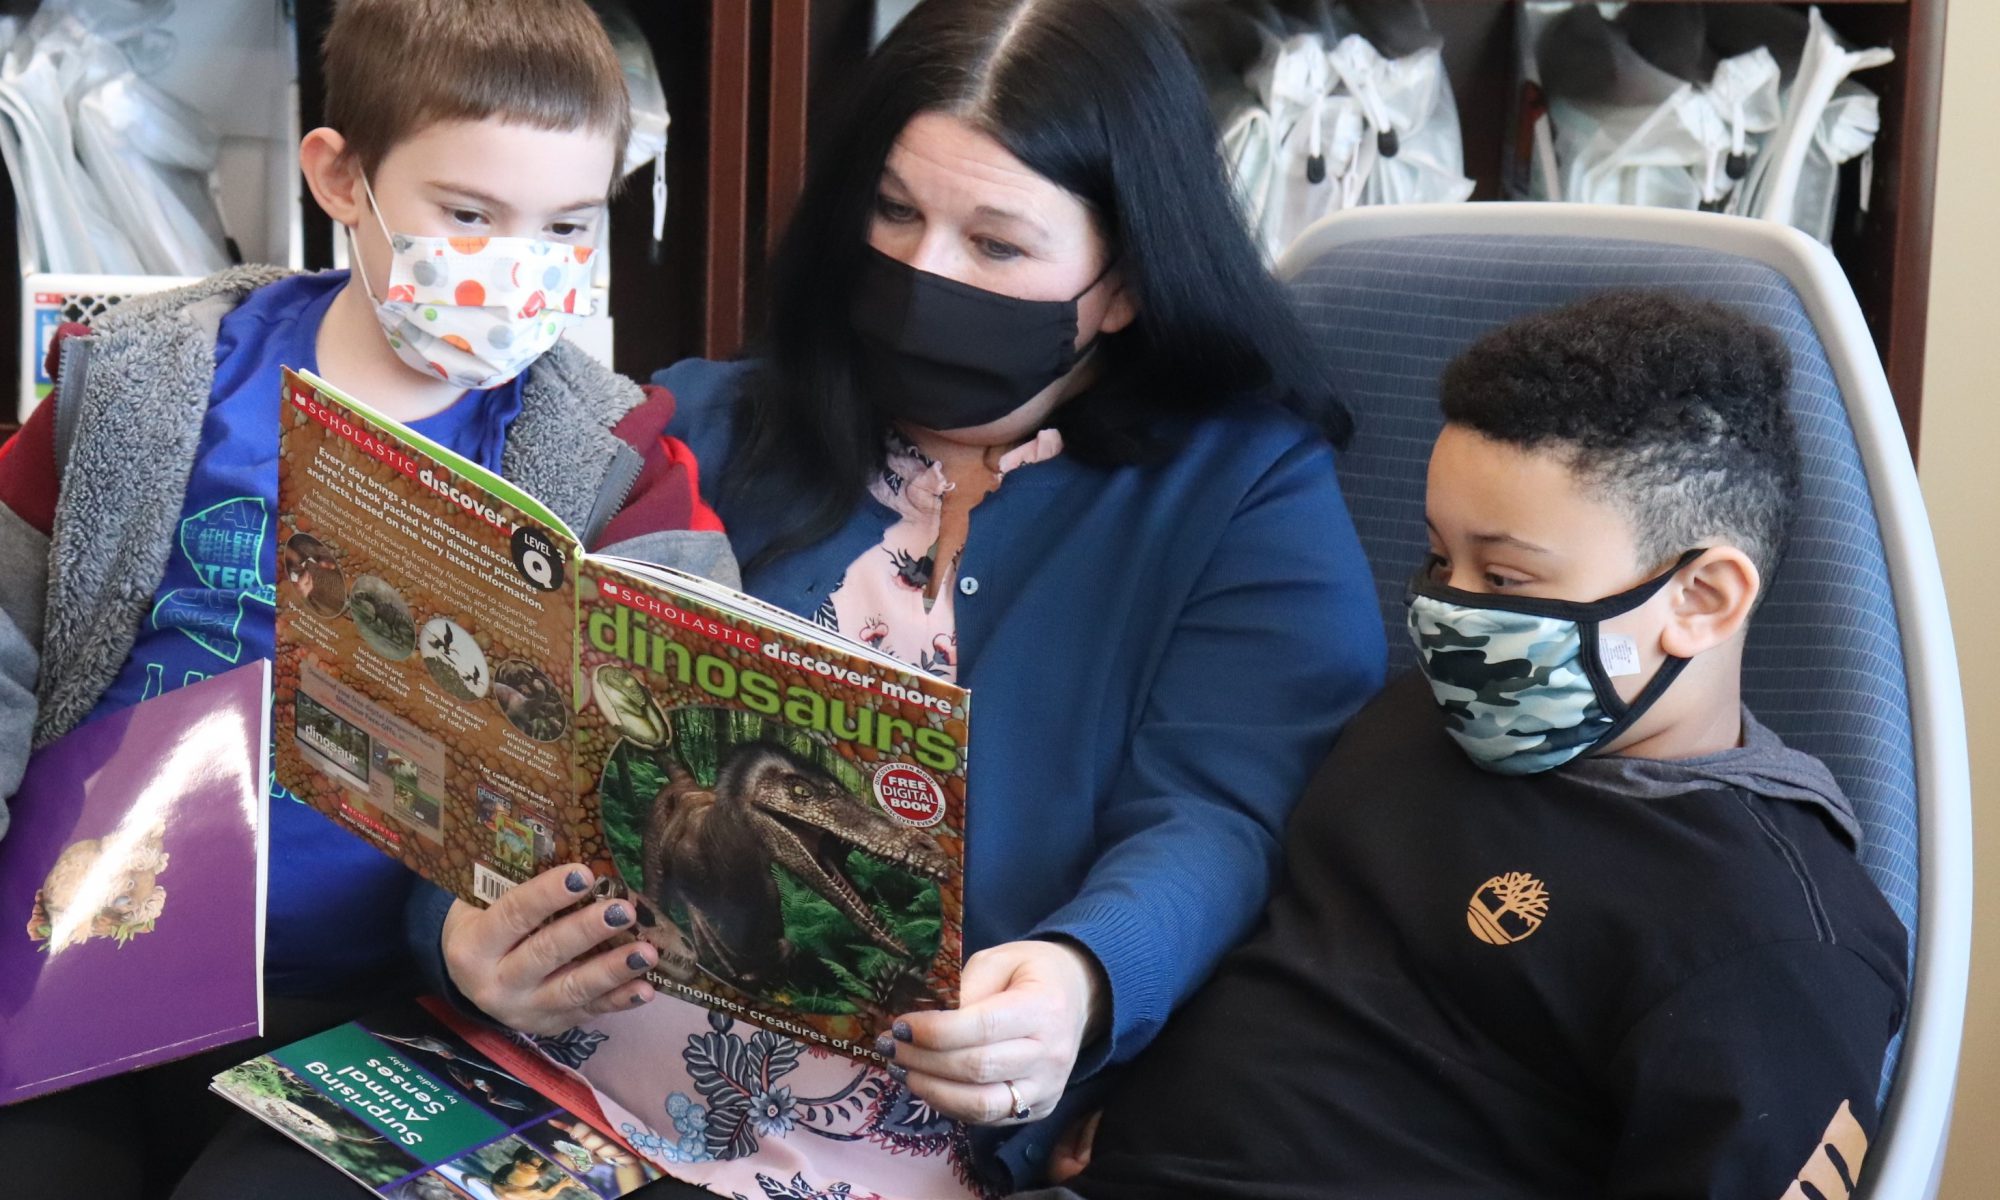 Two young students, one wearing a grey hoodie and face mask, the other wearing a black hoodie and face mask, sit on either side of a teachers with long black hair and a black face mask. The are reading a picture book on dinosaurs together.